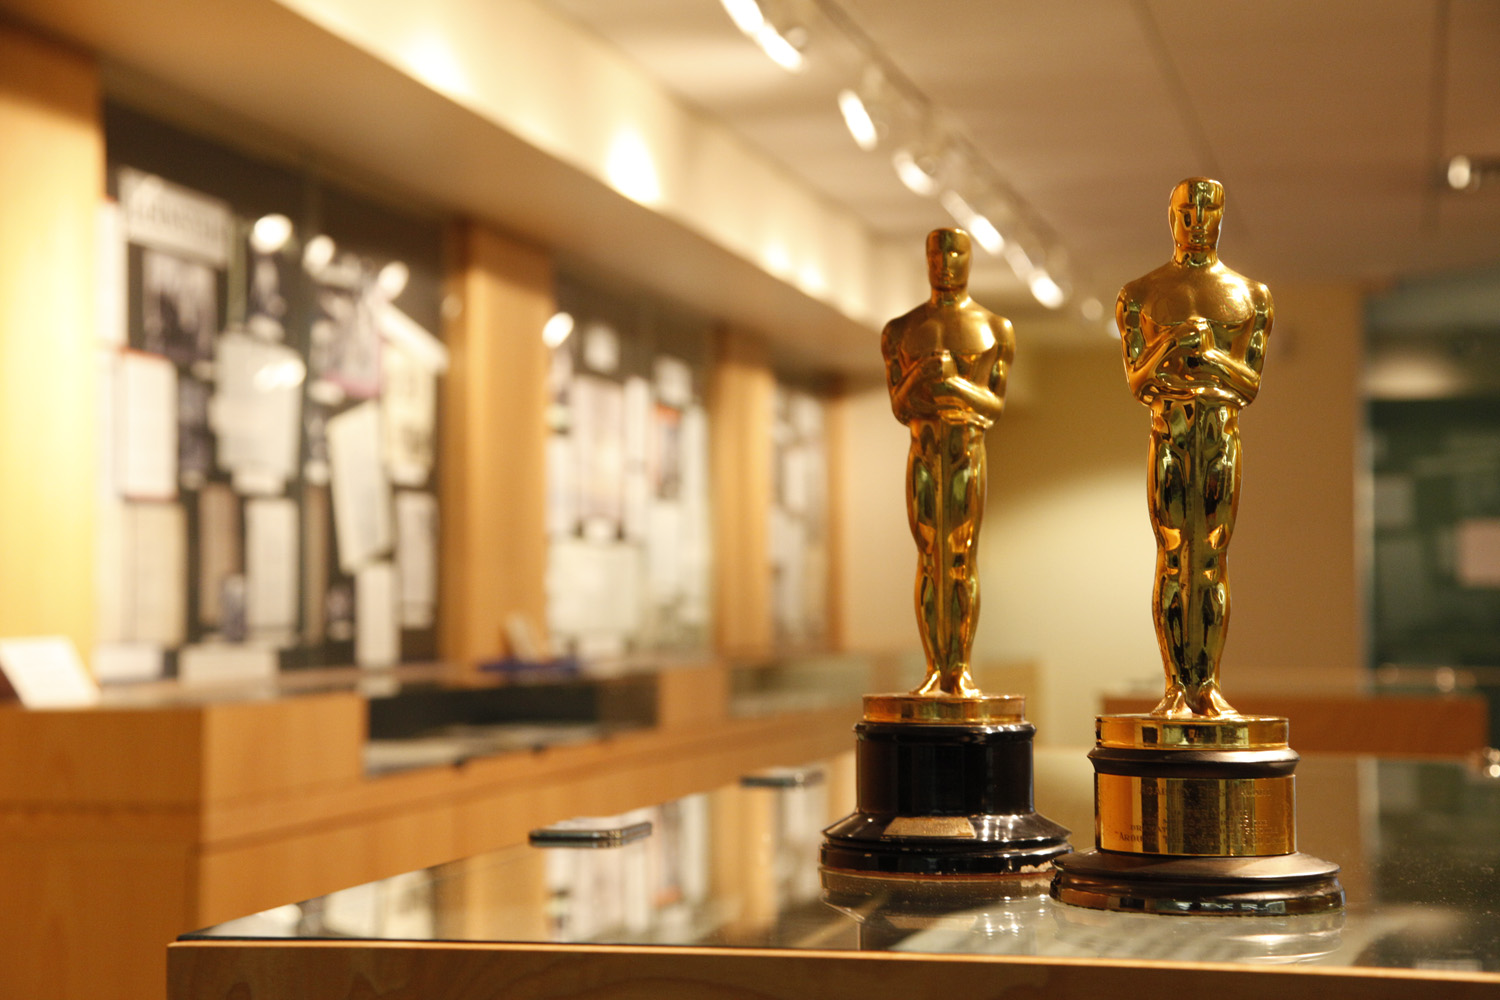 Two Oscars with the Archives and Special Collections Lobby in background